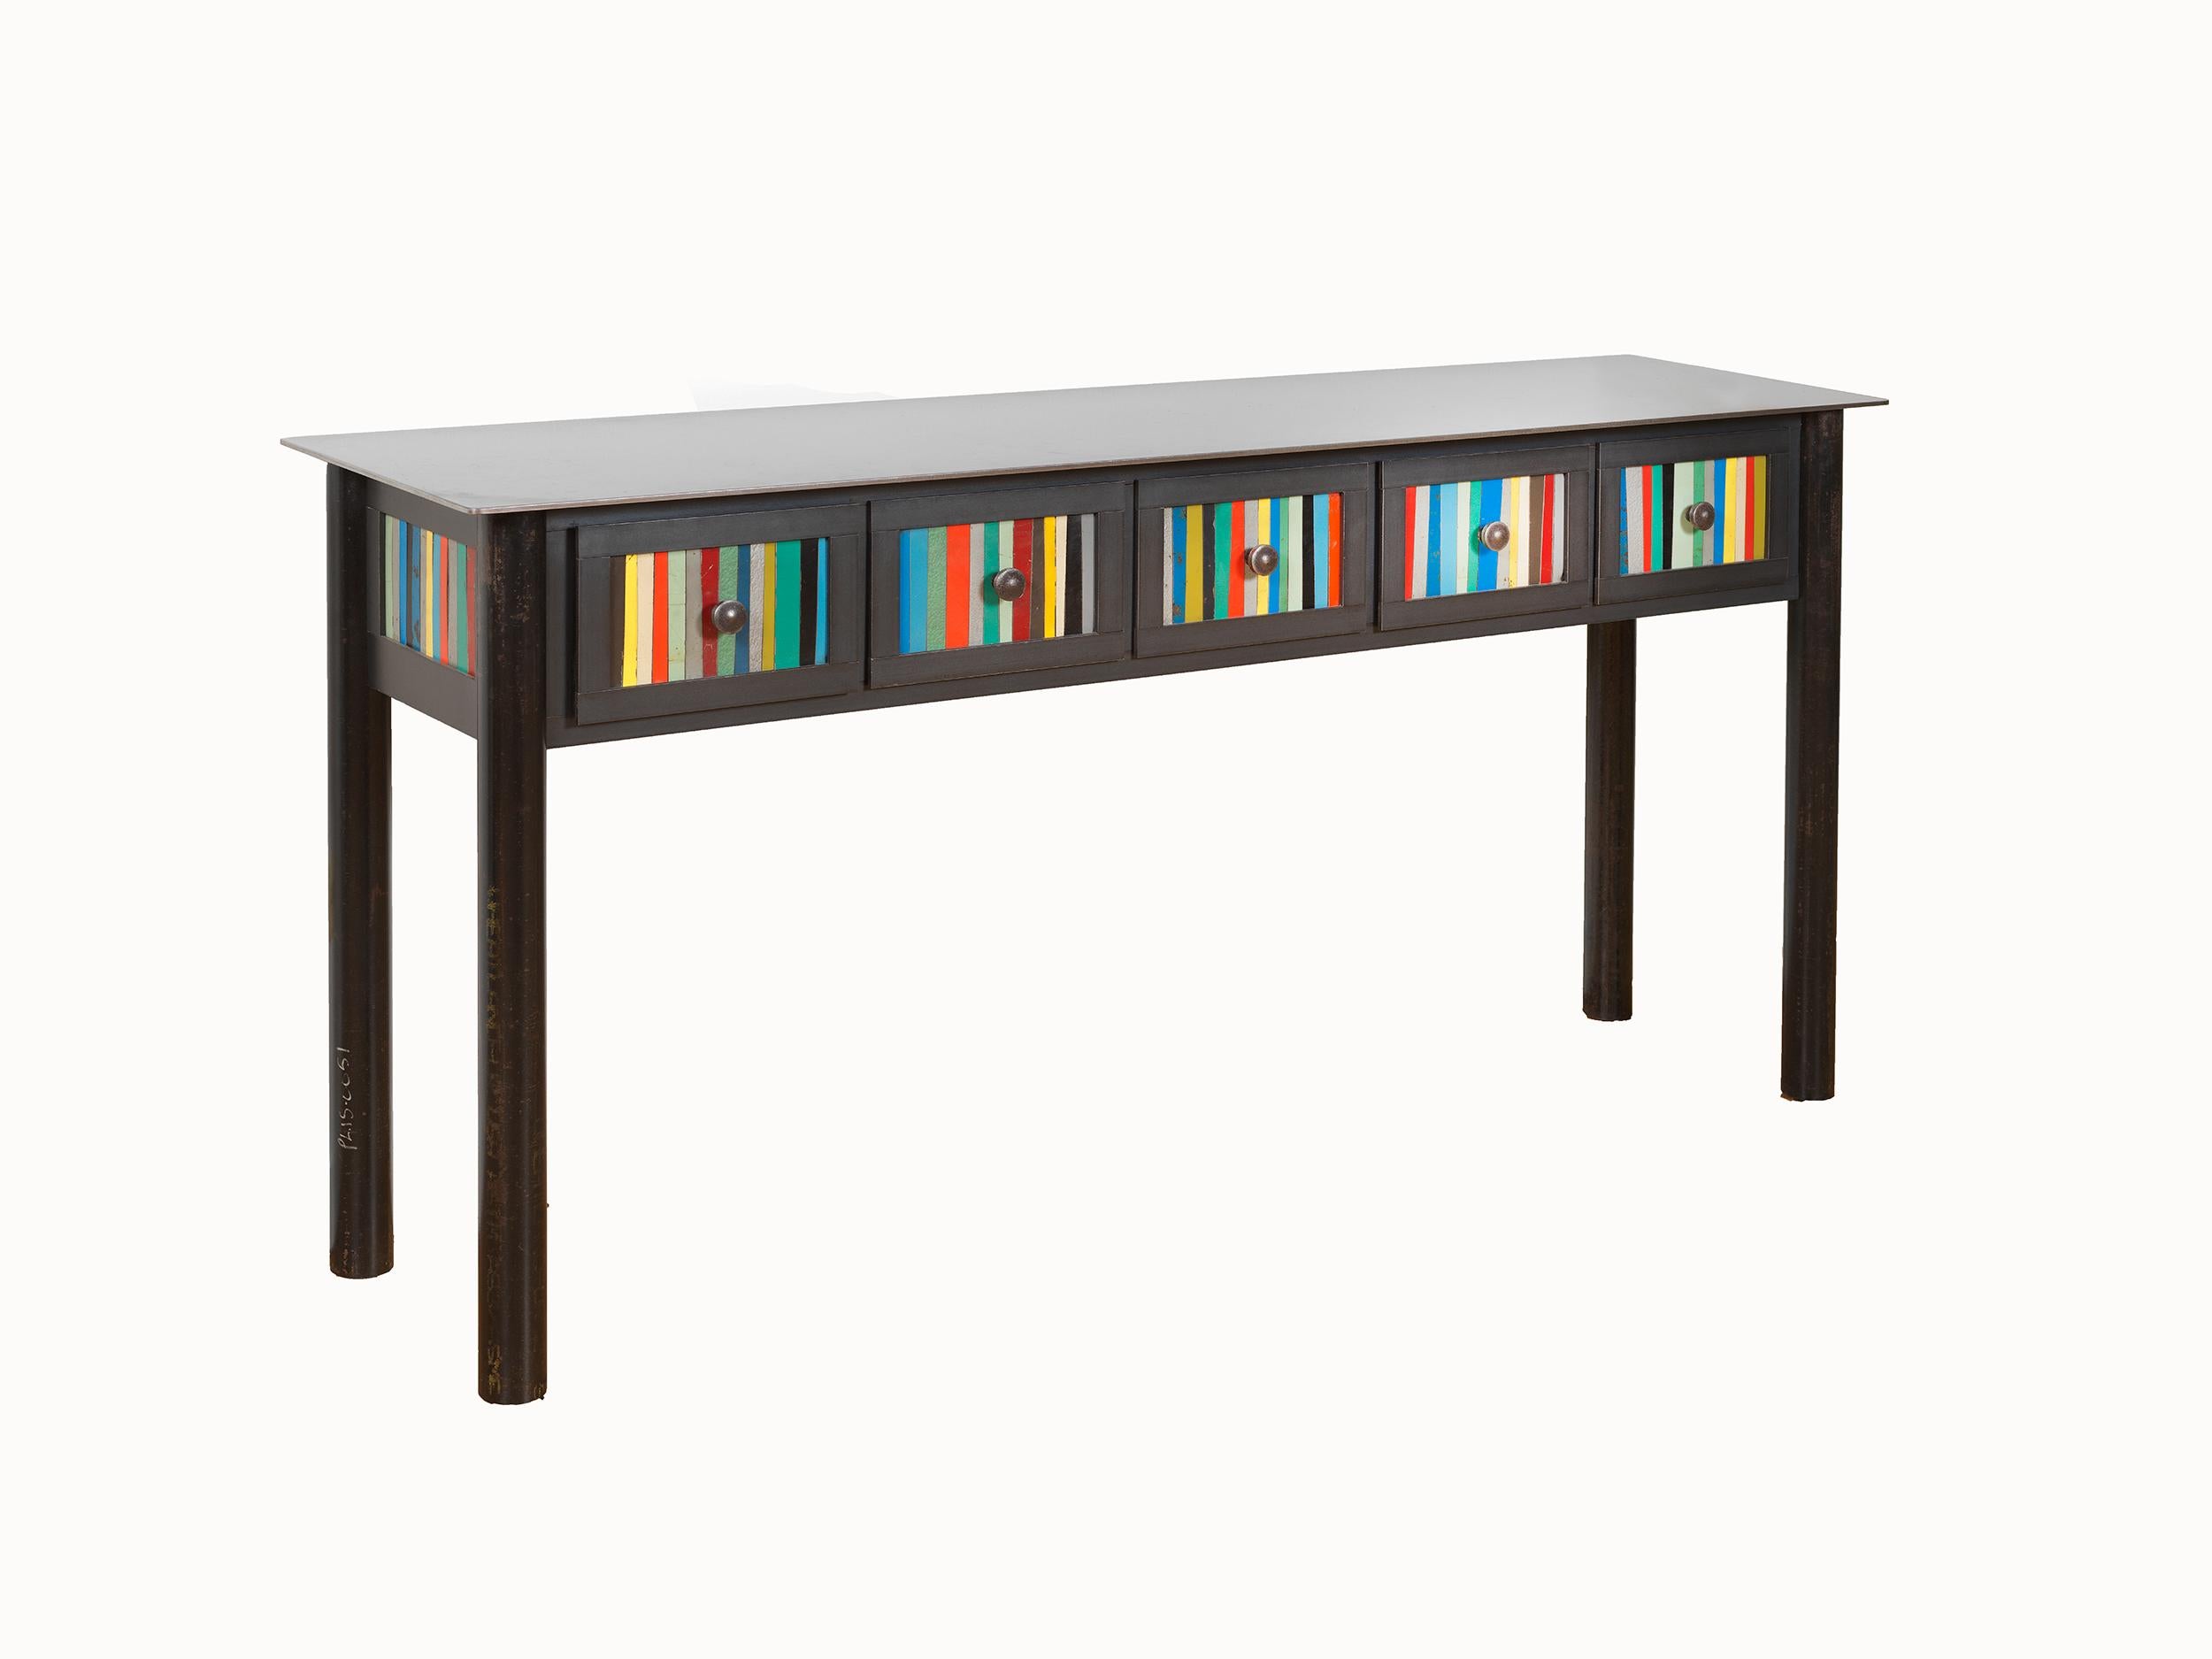 Jim Rose Abstract Sculpture - Five Drawer Strip Quilt Table - Steel Furniture, Gee's Bend Quilt Design